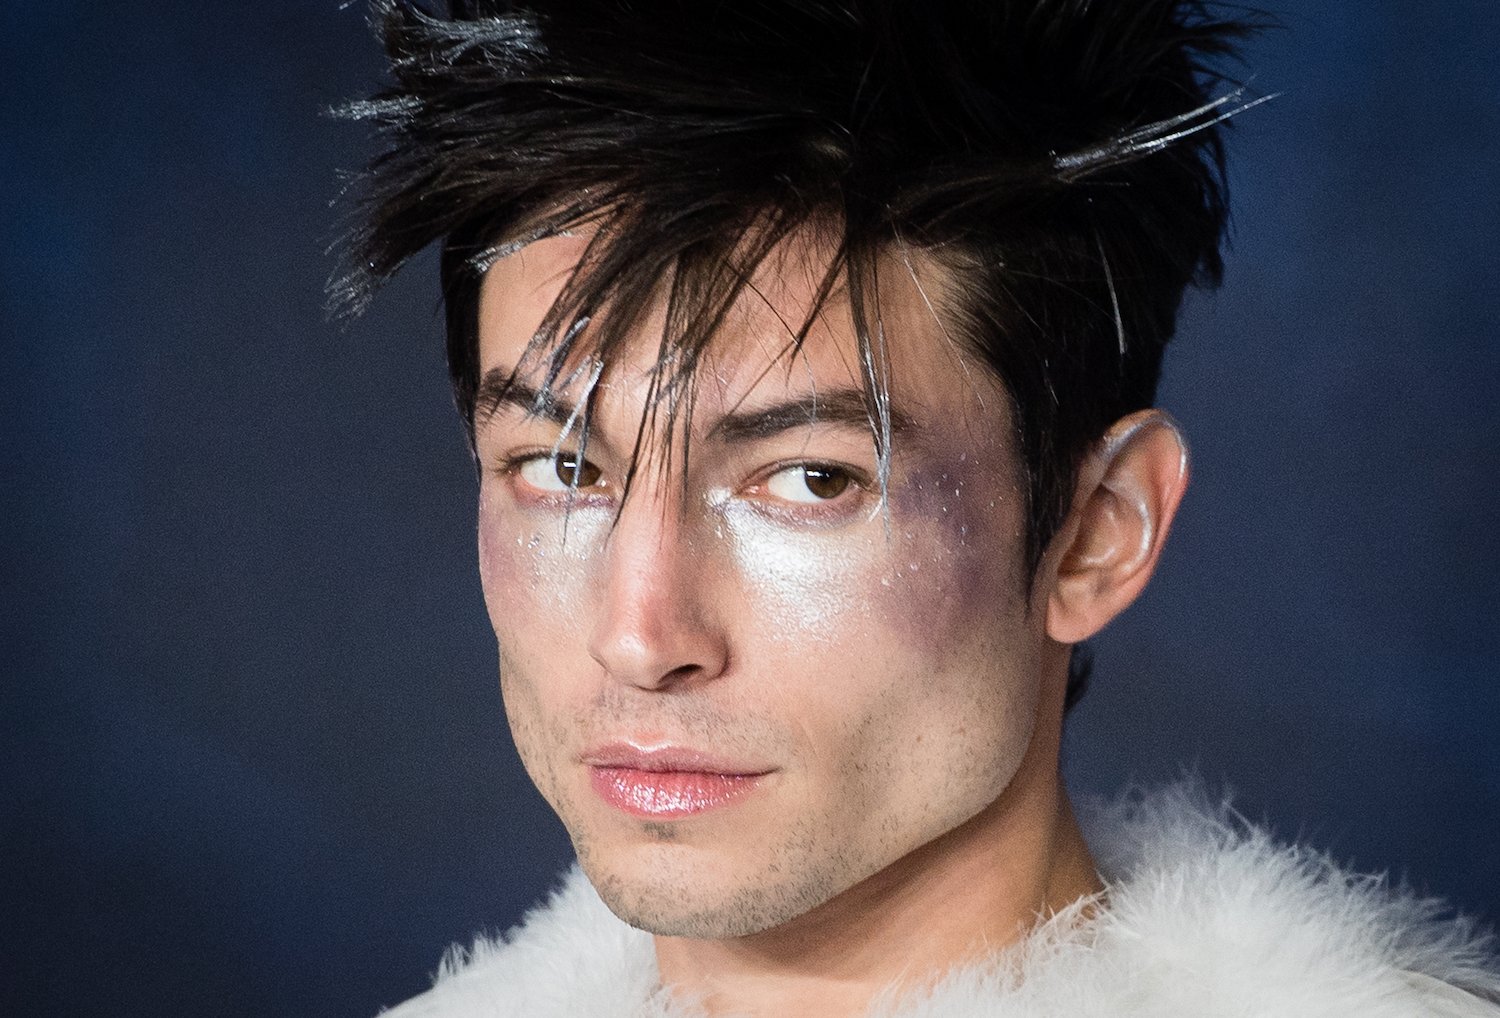 A close-up of Ezra Miller wearing white eye makeup at a premiere